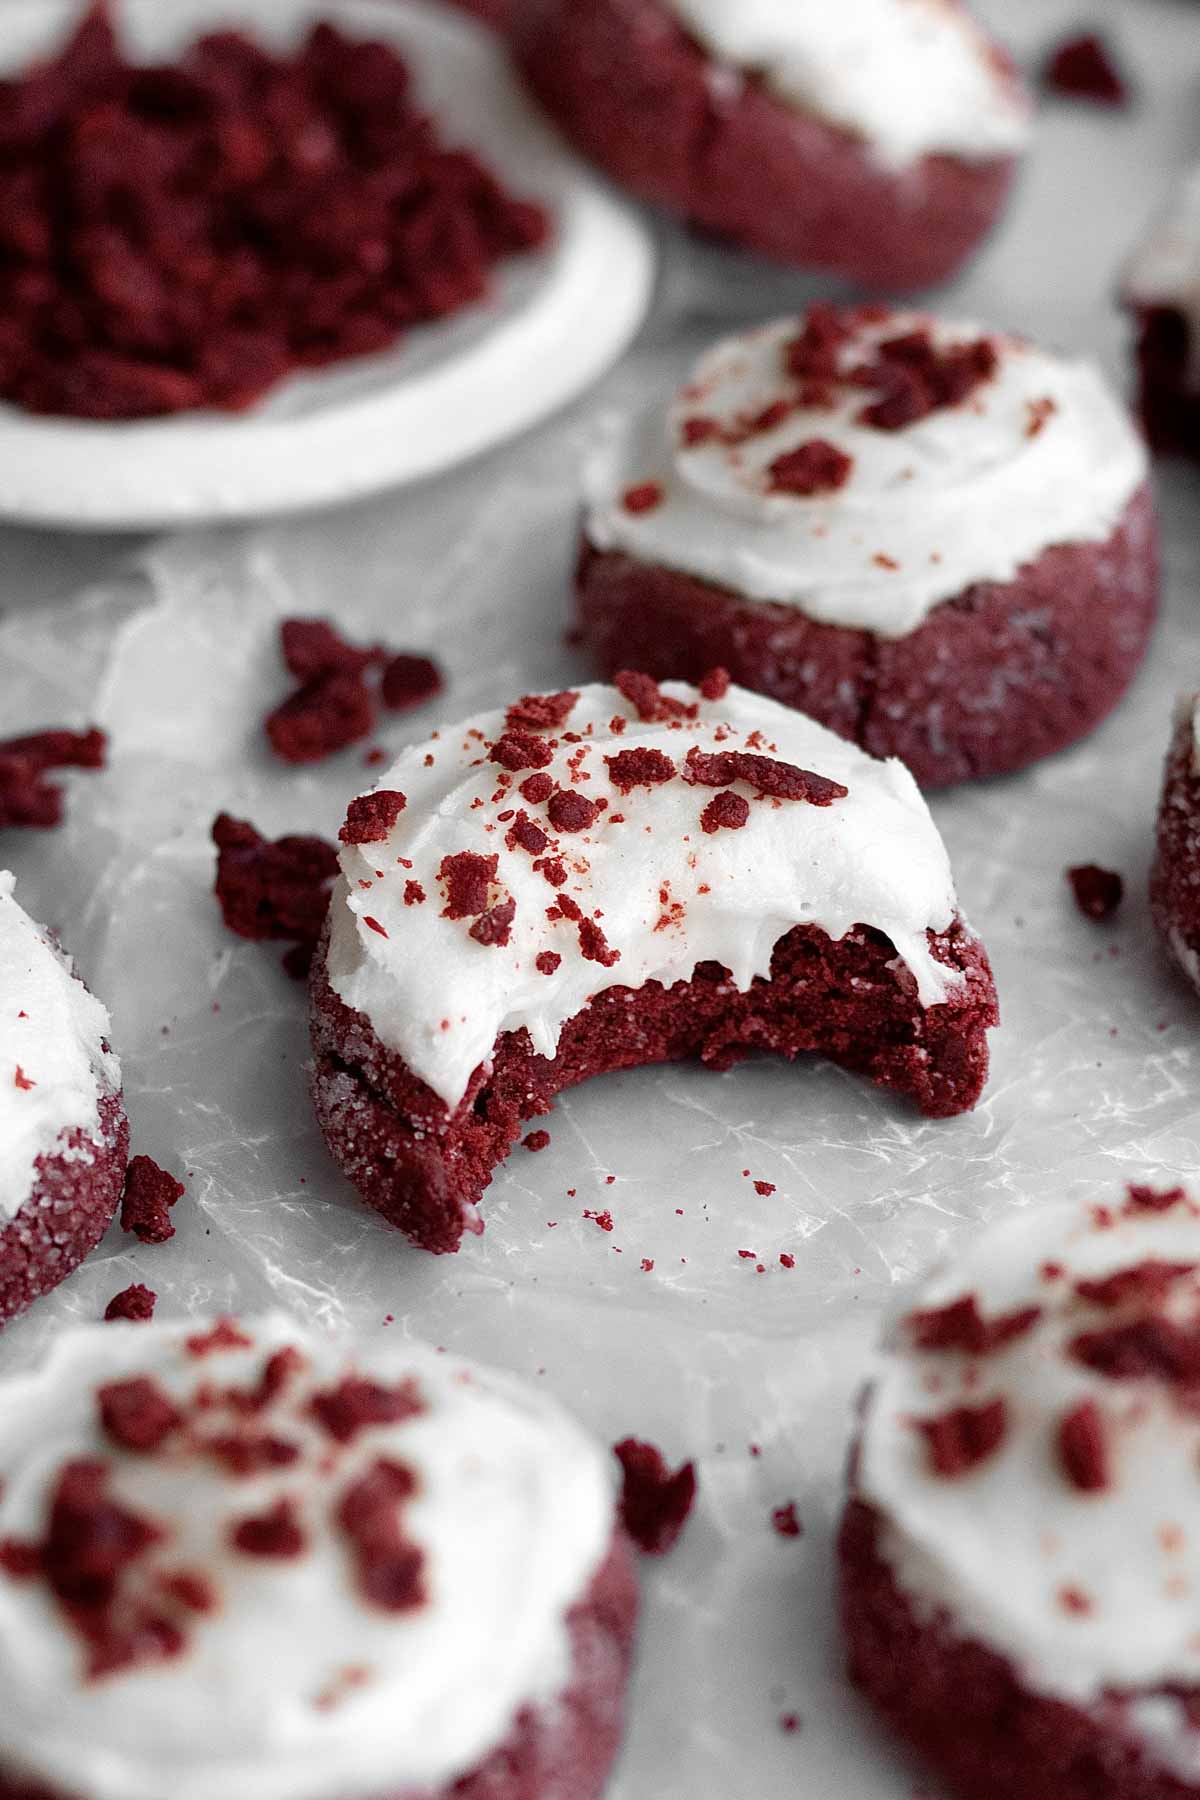 Someone took a bite out of this Frosted Red Velvet Cookie.